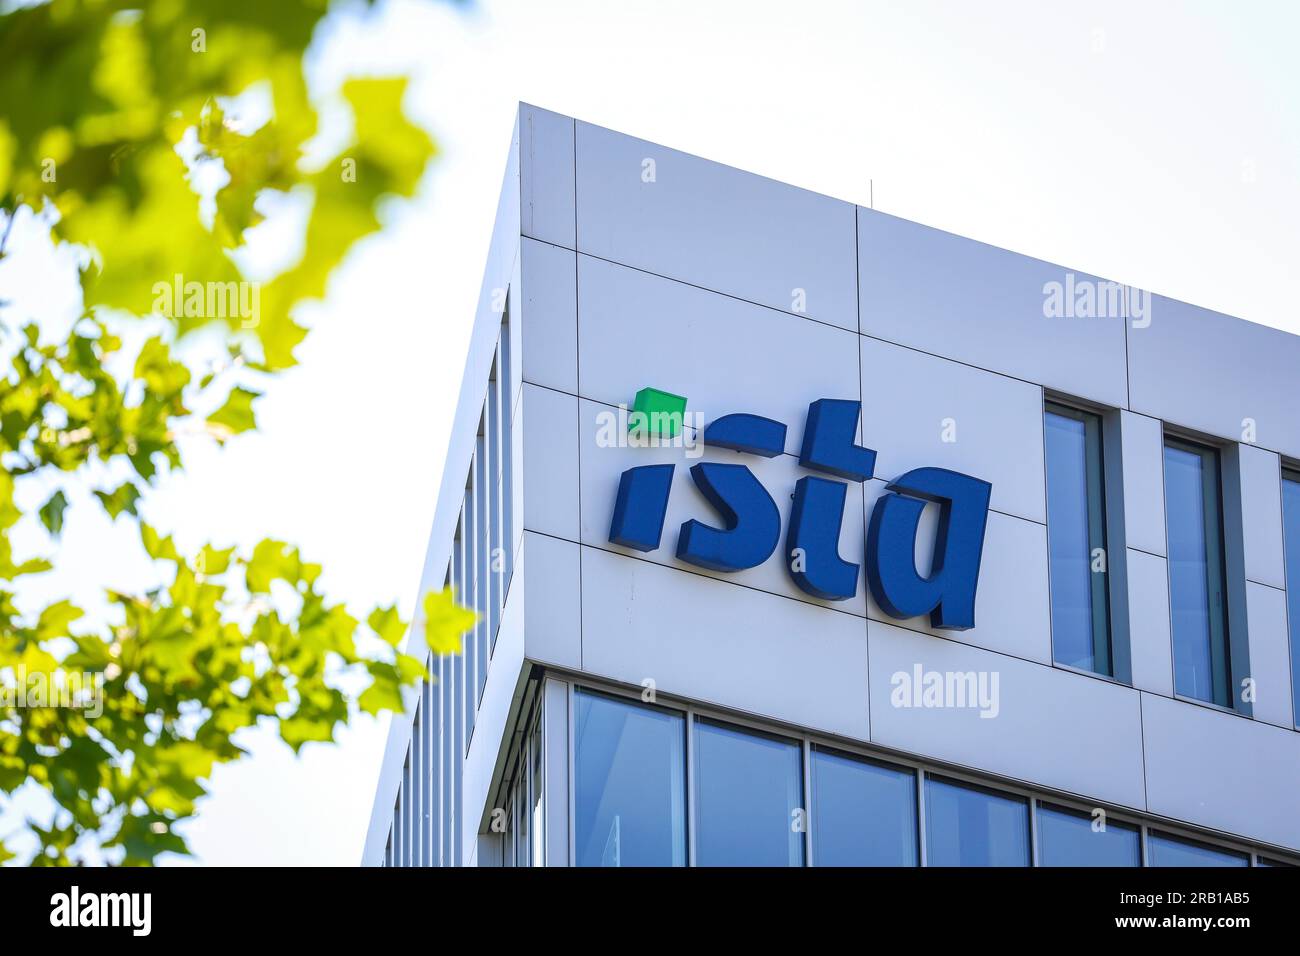 Essen, North Rhine-Westphalia, Germany - Ista SE (proper spelling ista) is a globally represented energy service provider headquartered in Essen. Its core service is heating cost billing. It is part of the operating cost billing. This includes information on the consumption of heating energy and hot water. Stock Photo